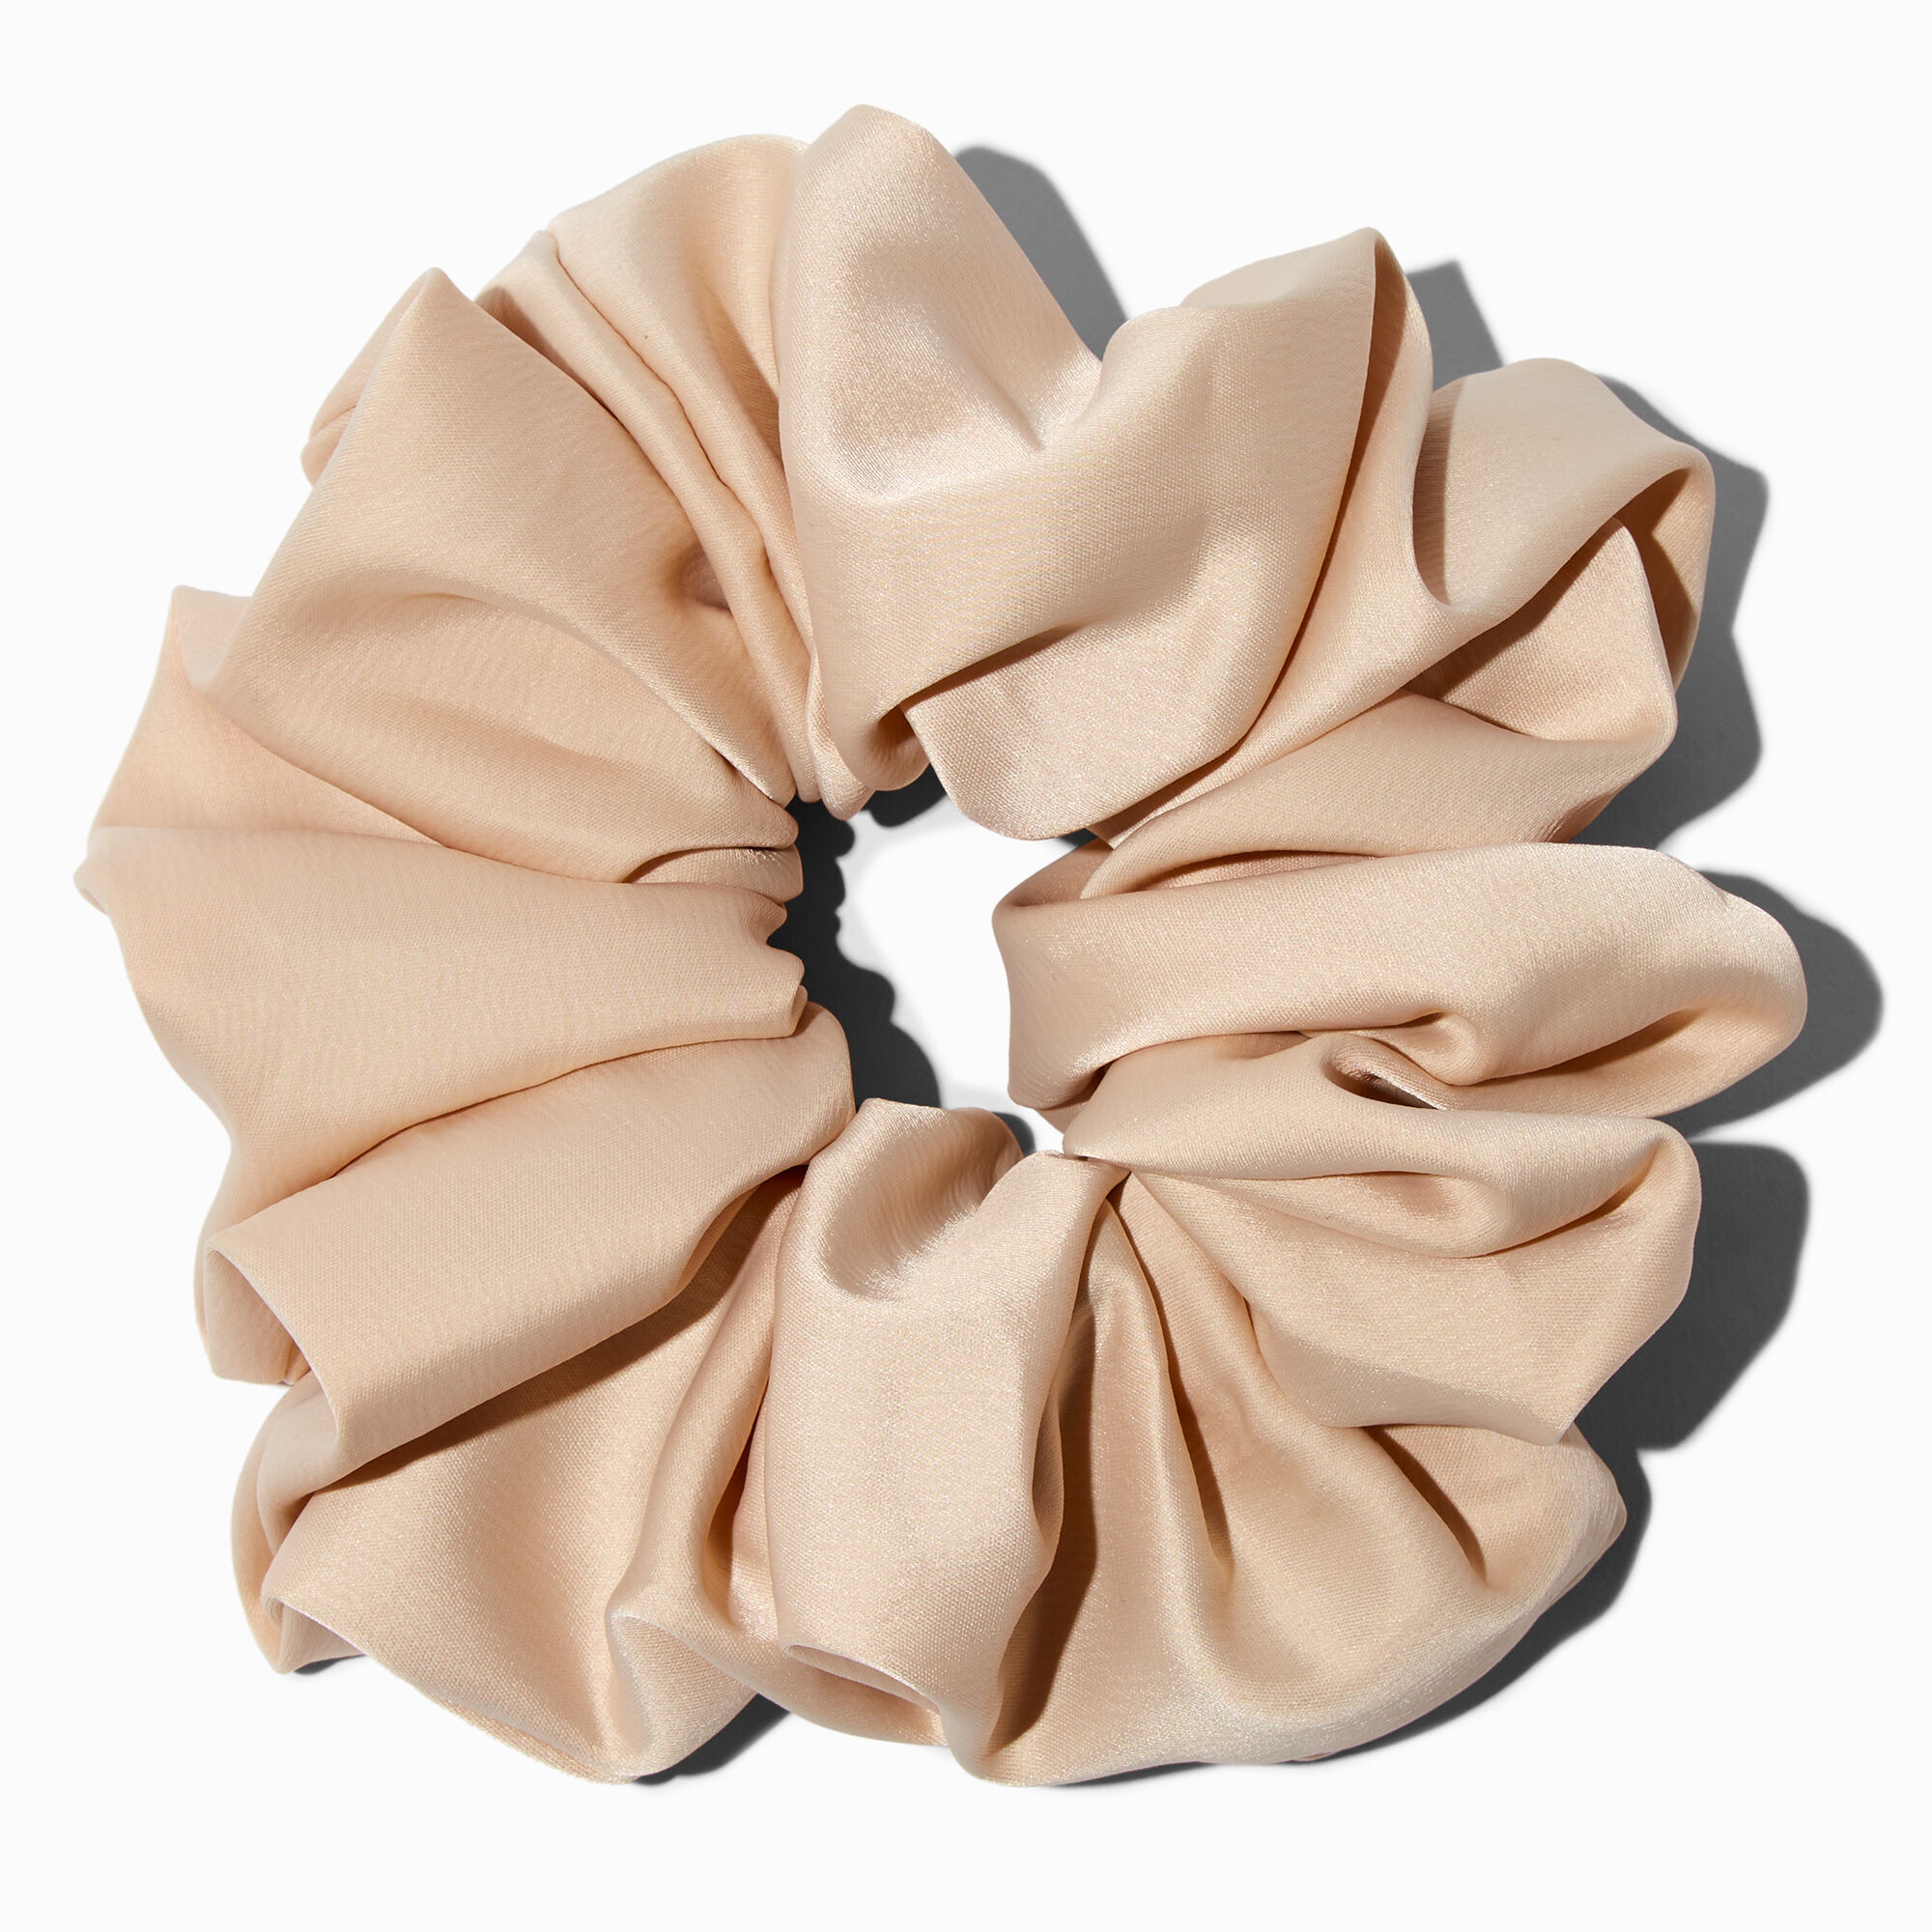 View Claires Giant Nude Silky Hair Scrunchie Bracelet information